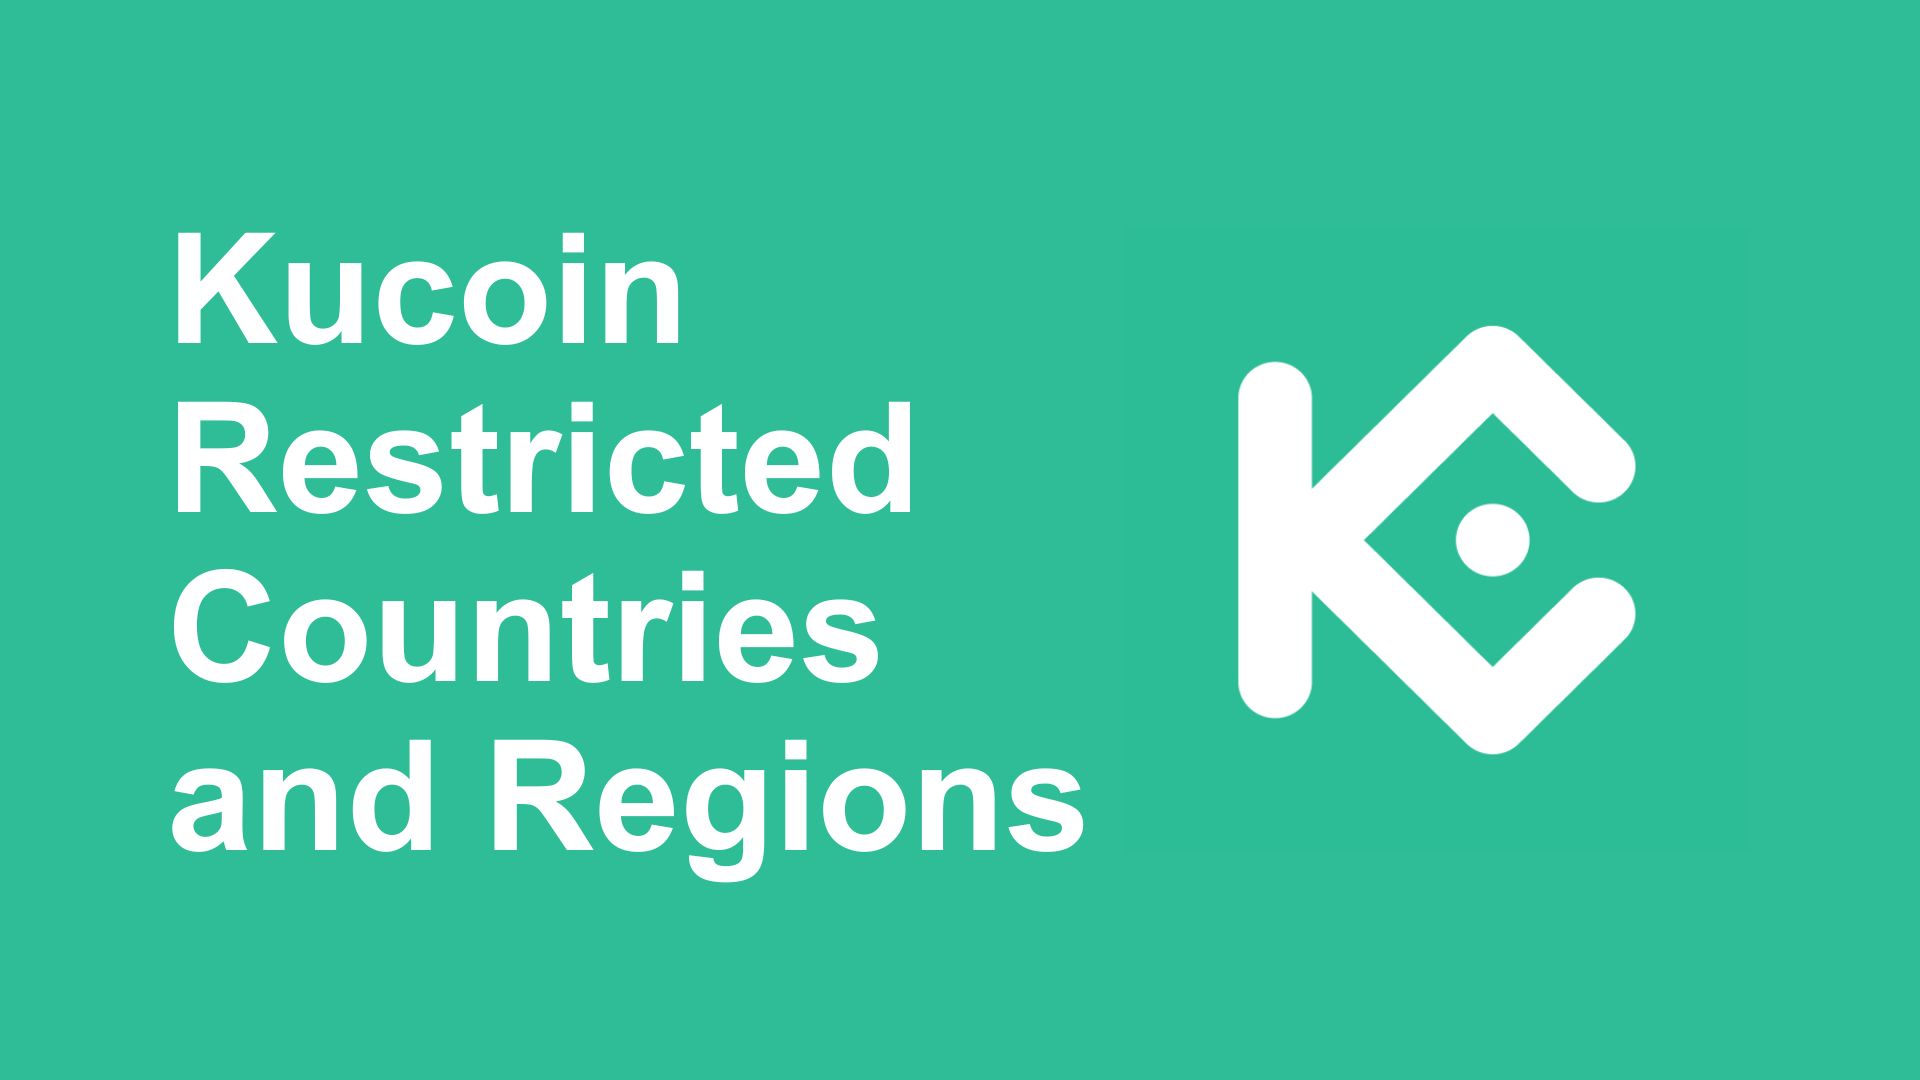 Kucoin Restricted Countries and Regions